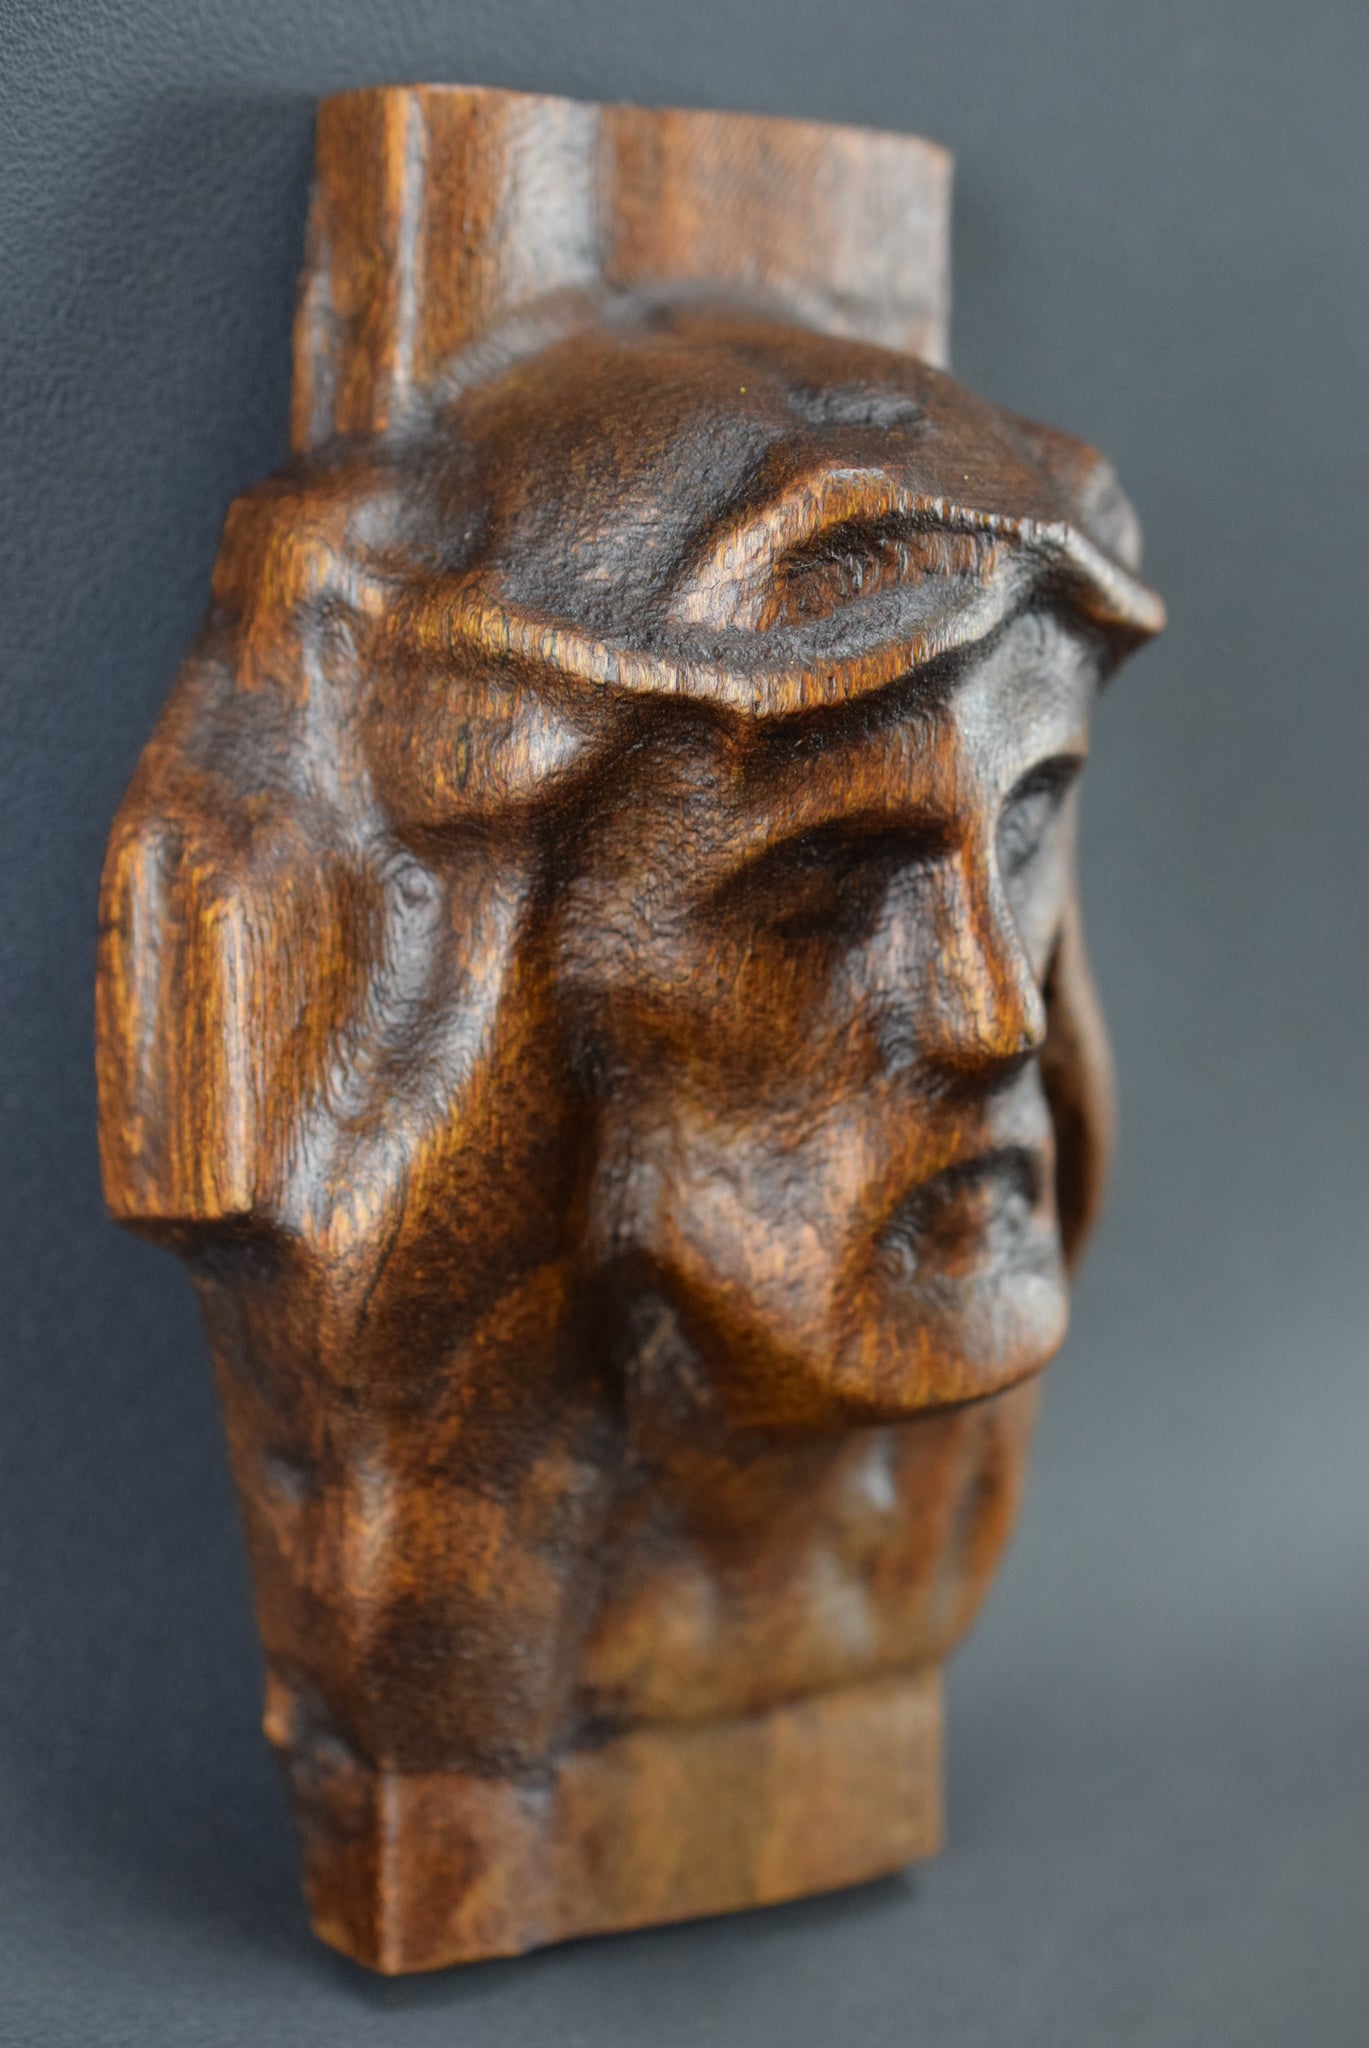 French Vintage Carved Wood Holy Face of Jesus Sculpture Carving Wall Panel